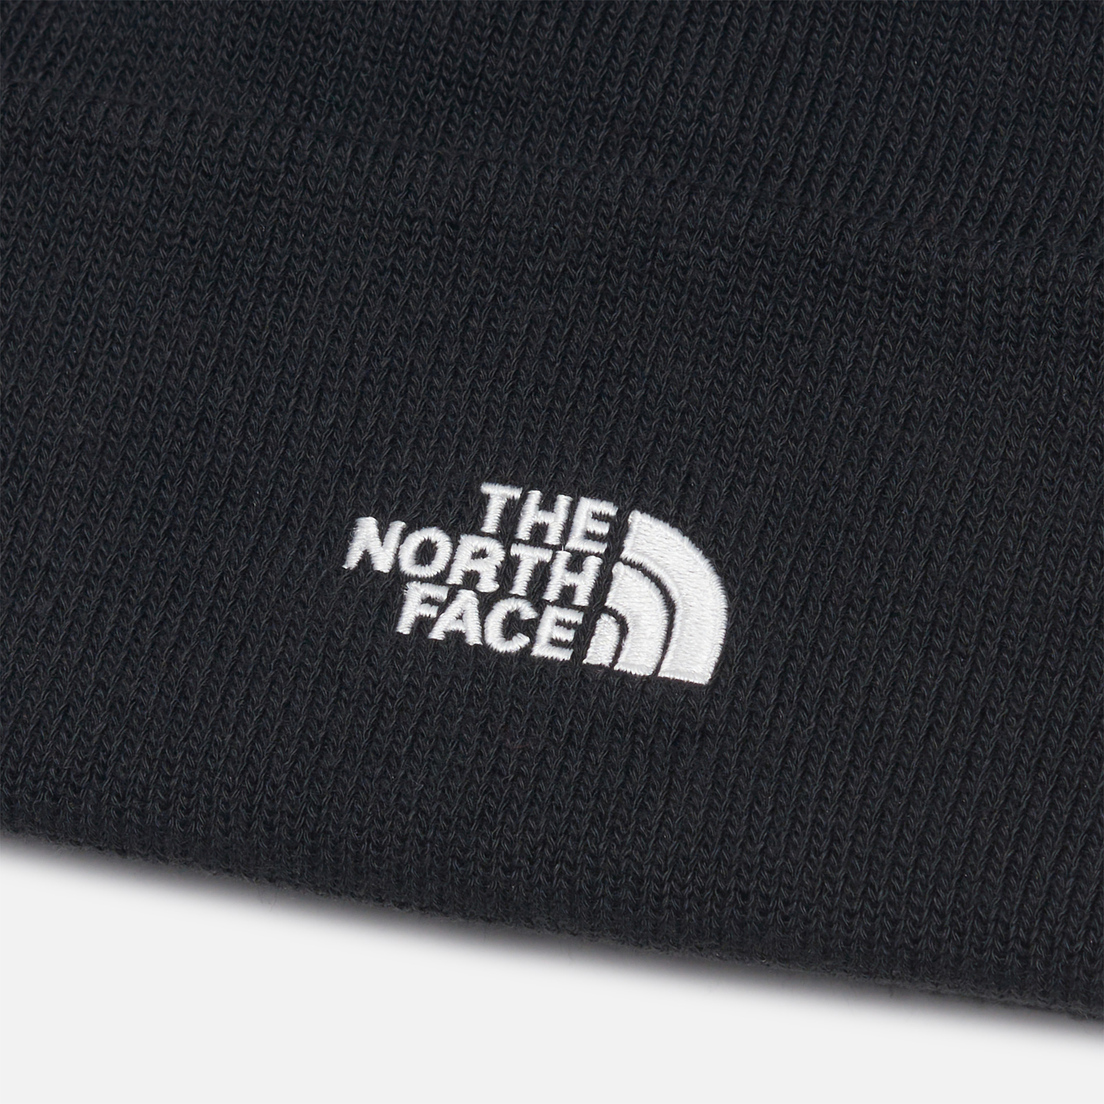 The North Face Шапка Norm